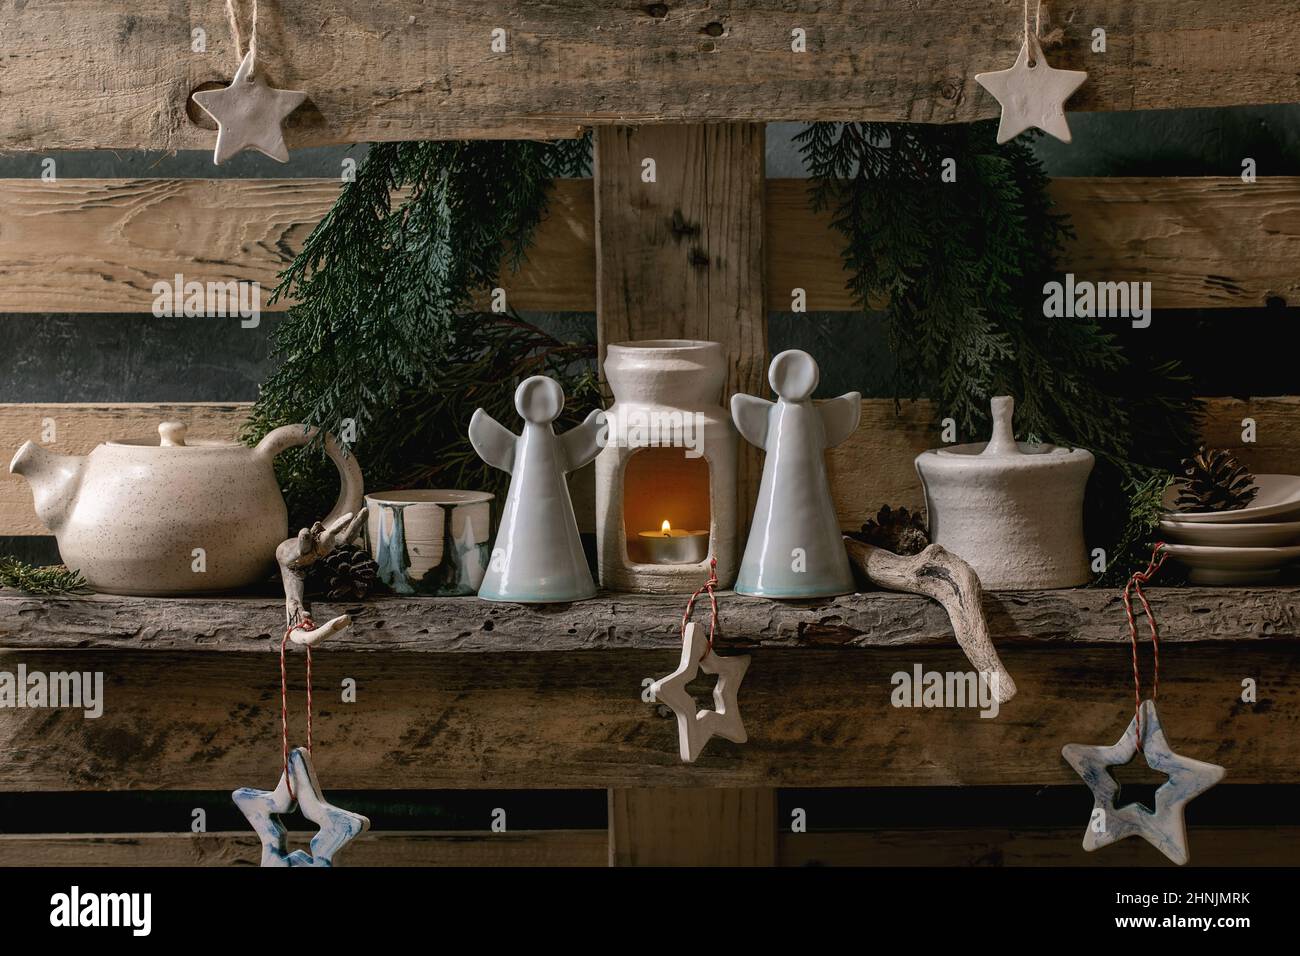 Christmas fashion rustic style interior decor with craft wood, ceramics and angels on old wooden pallet shelf and thuja branches at background. Scandi Stock Photo